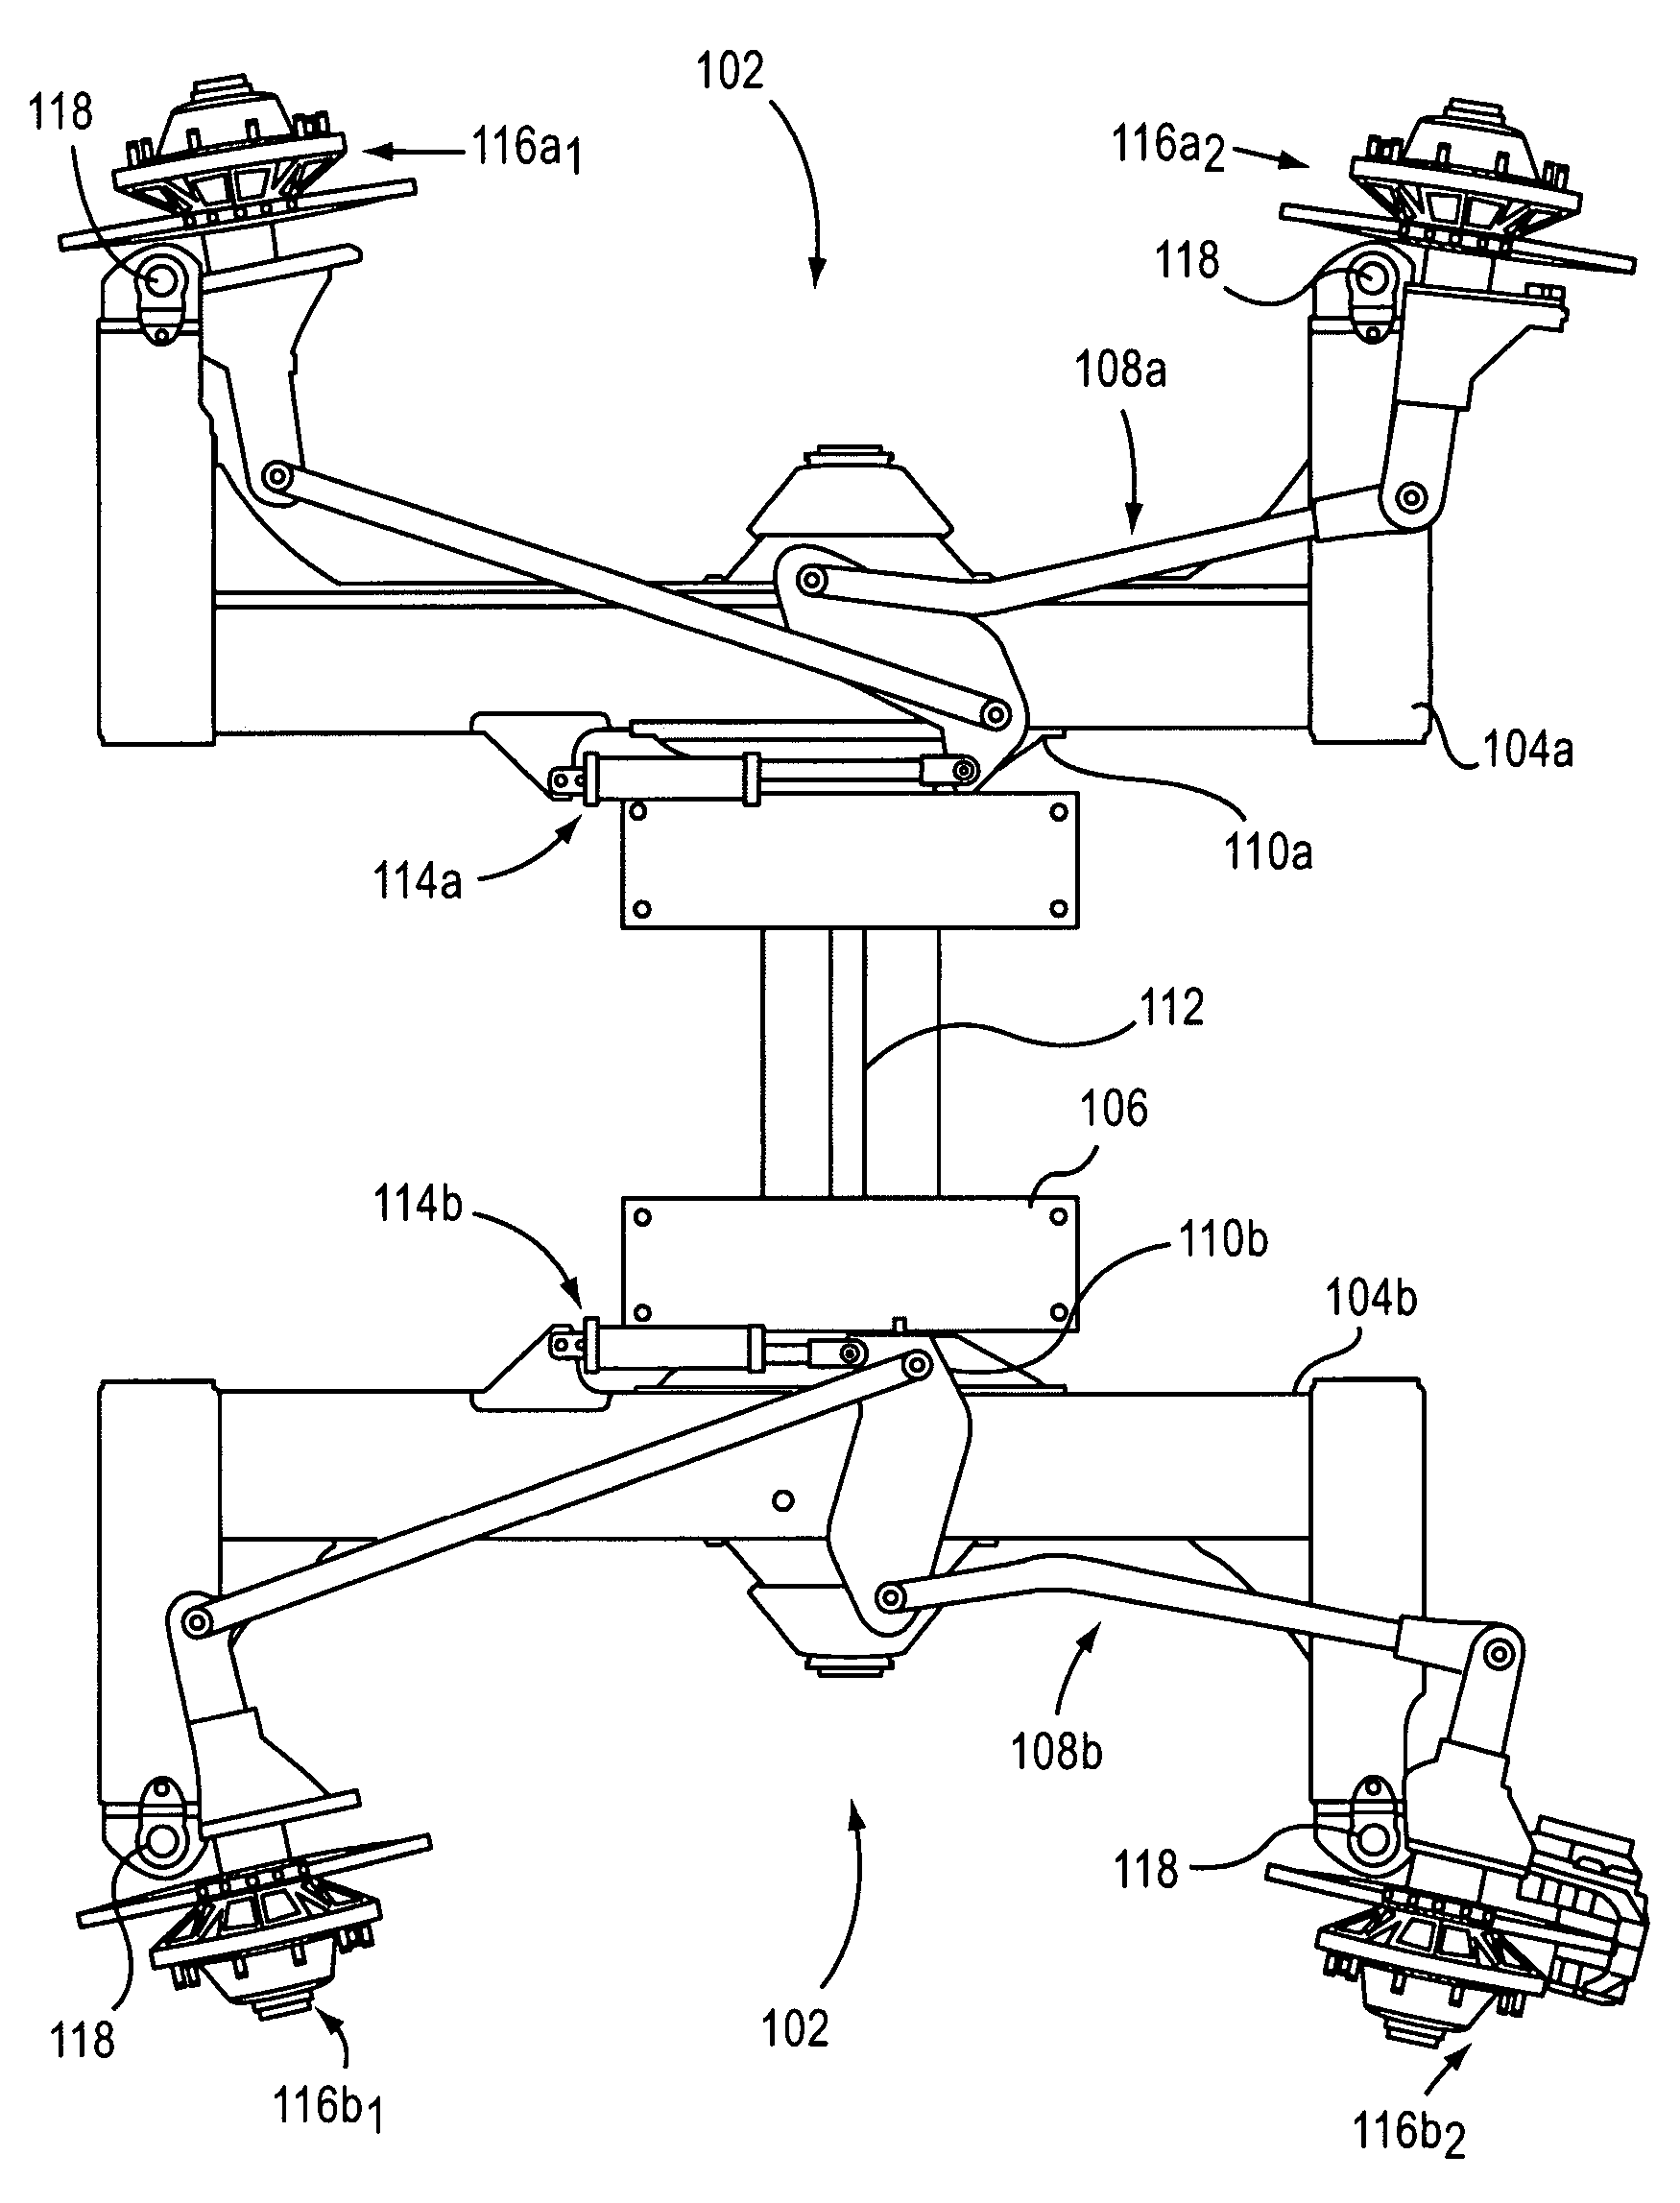 Oscillating steering system for an agricultural implement